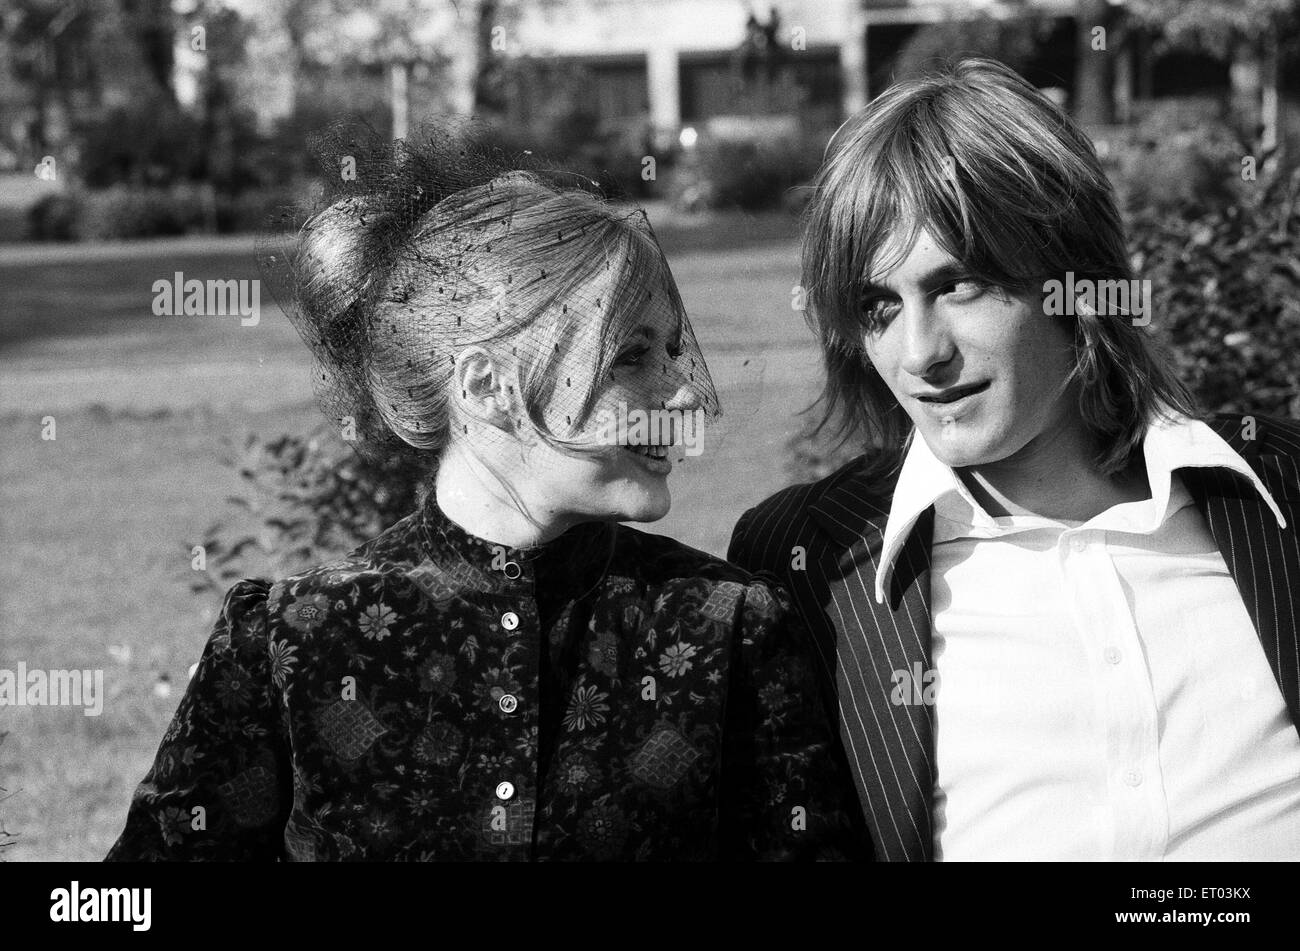 Pop singer and actress Marianne Faithfull who has recently left bexley Hospital, after being cured of heroin addiction is pictured here with her new boyfriend Oliver Musker, aged 23, an antique dealer. Marianne and Oliver will be flying off later this week to the island of Bali as part of her convalescence. 3rd October 1972. Stock Photo